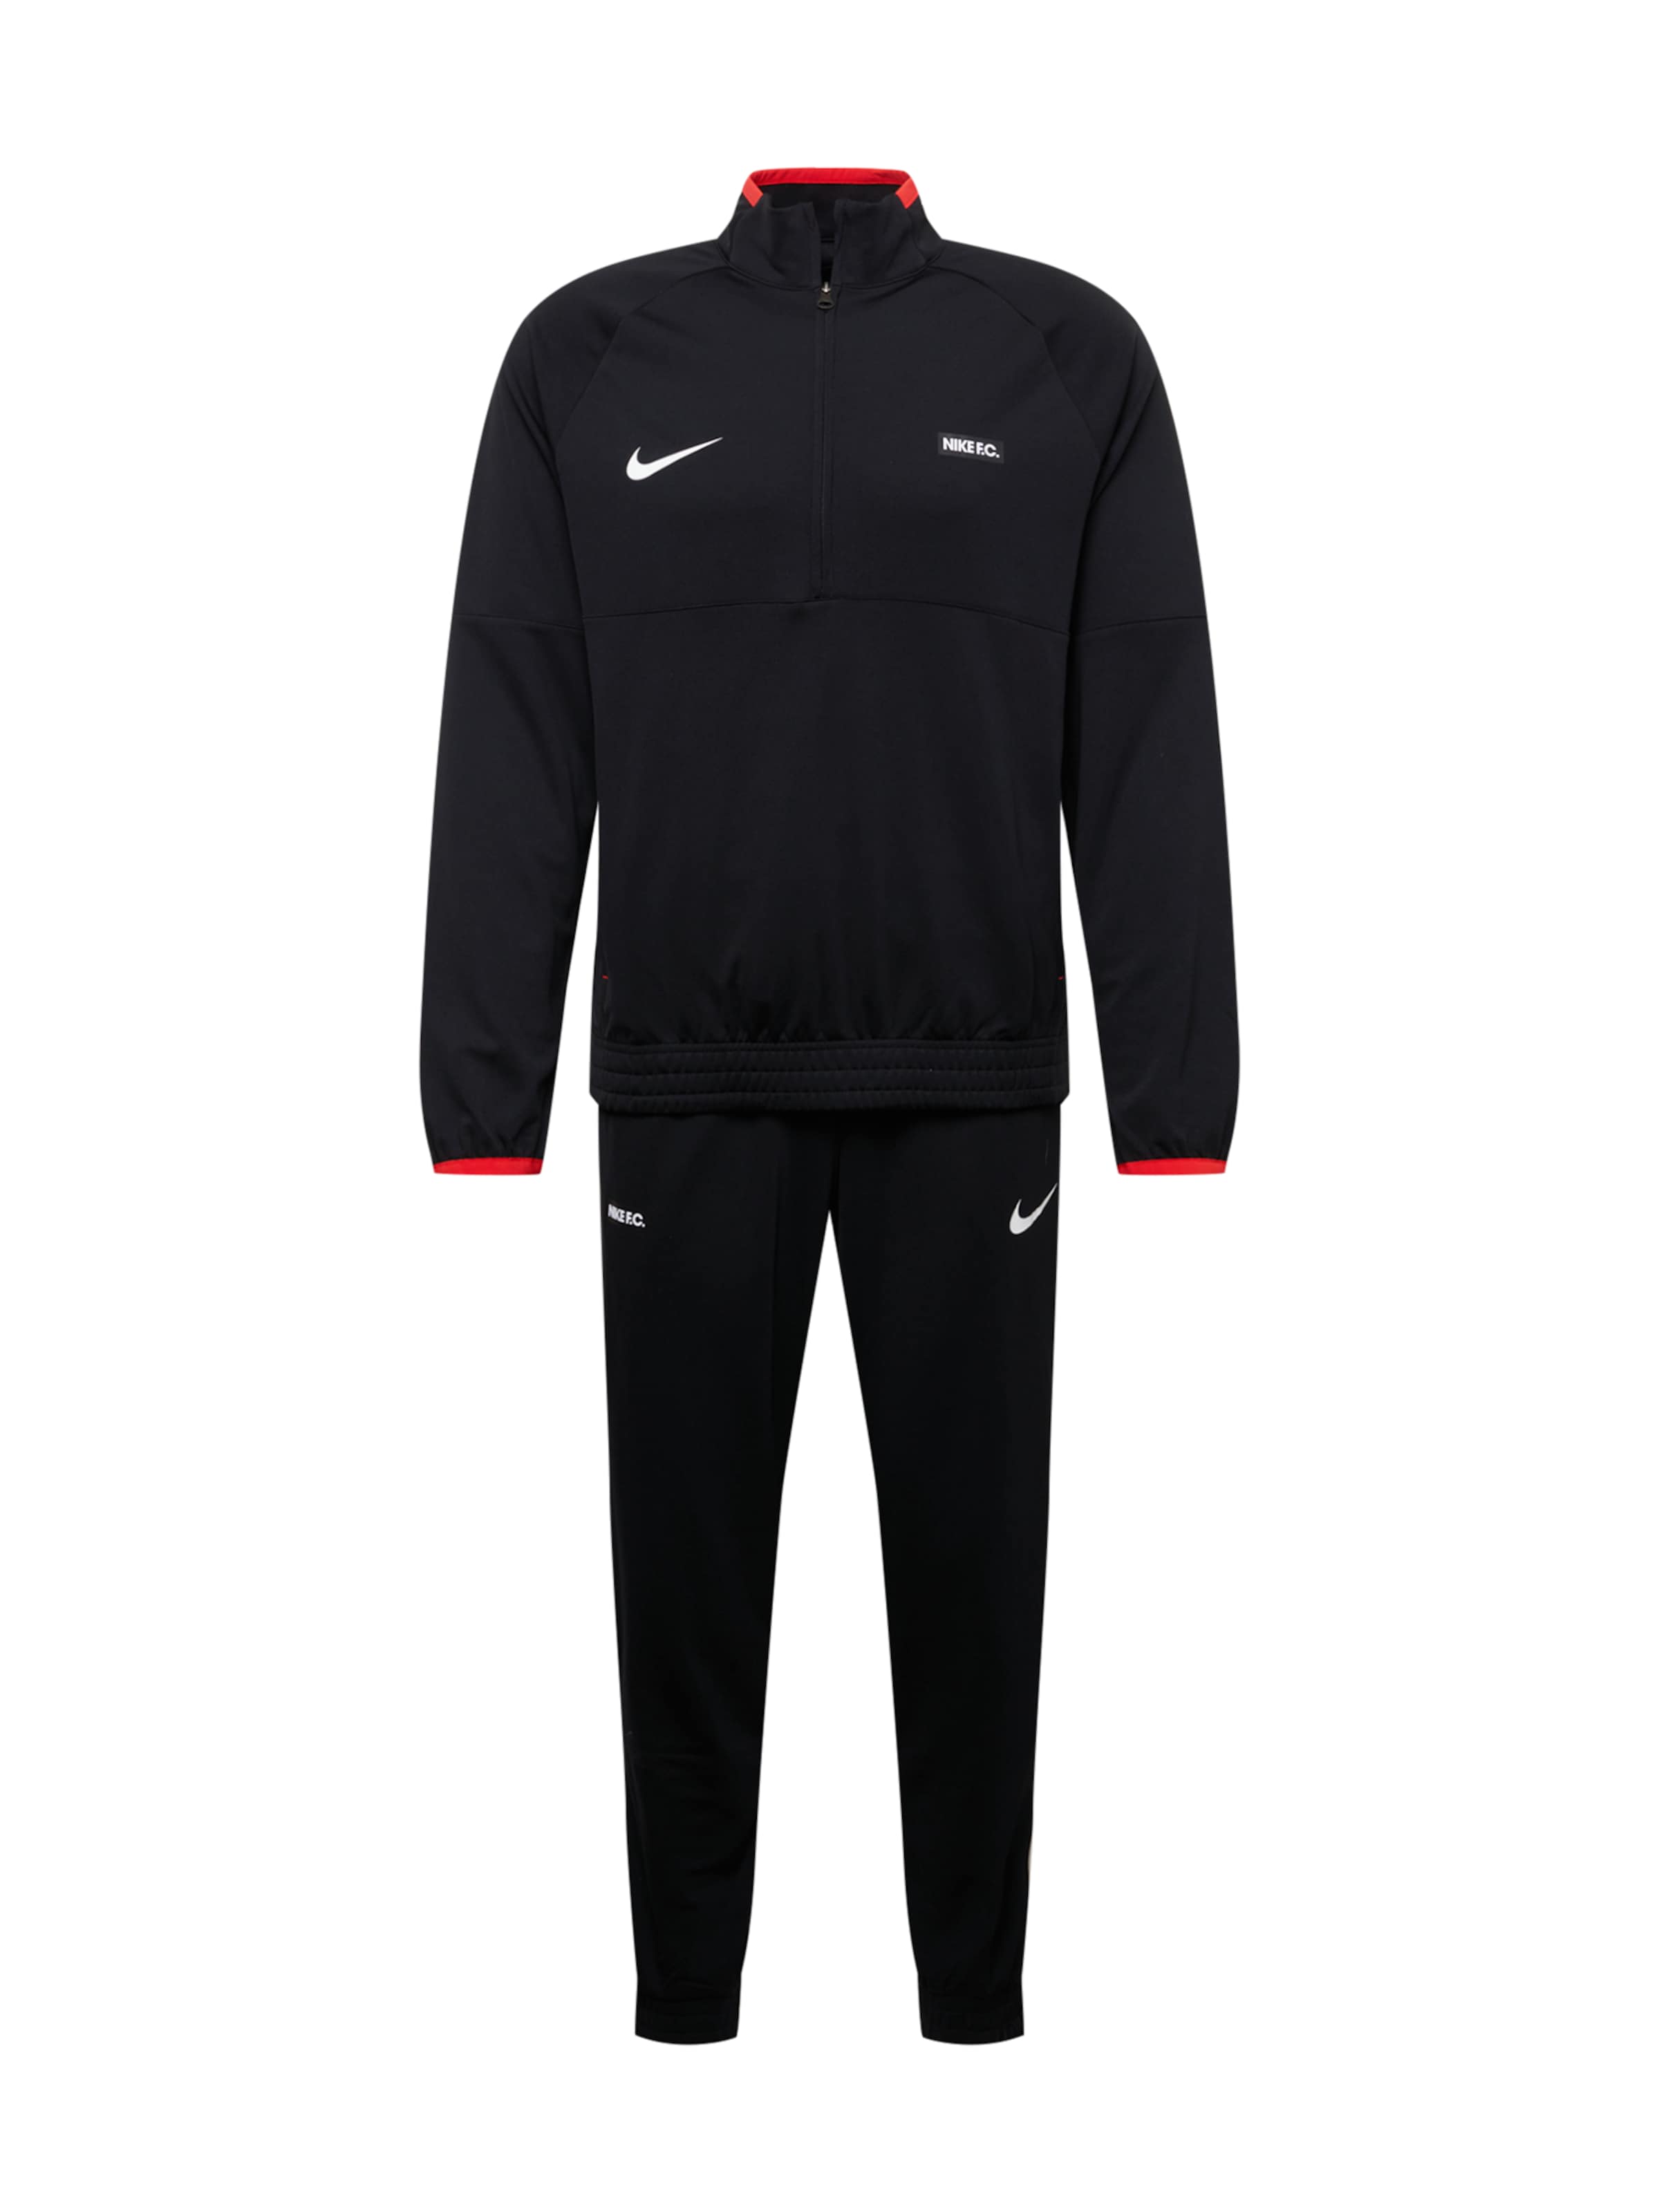 Mens Sports Academy Warm Up 2 Pieces Tracksuit Jacket Bottoms